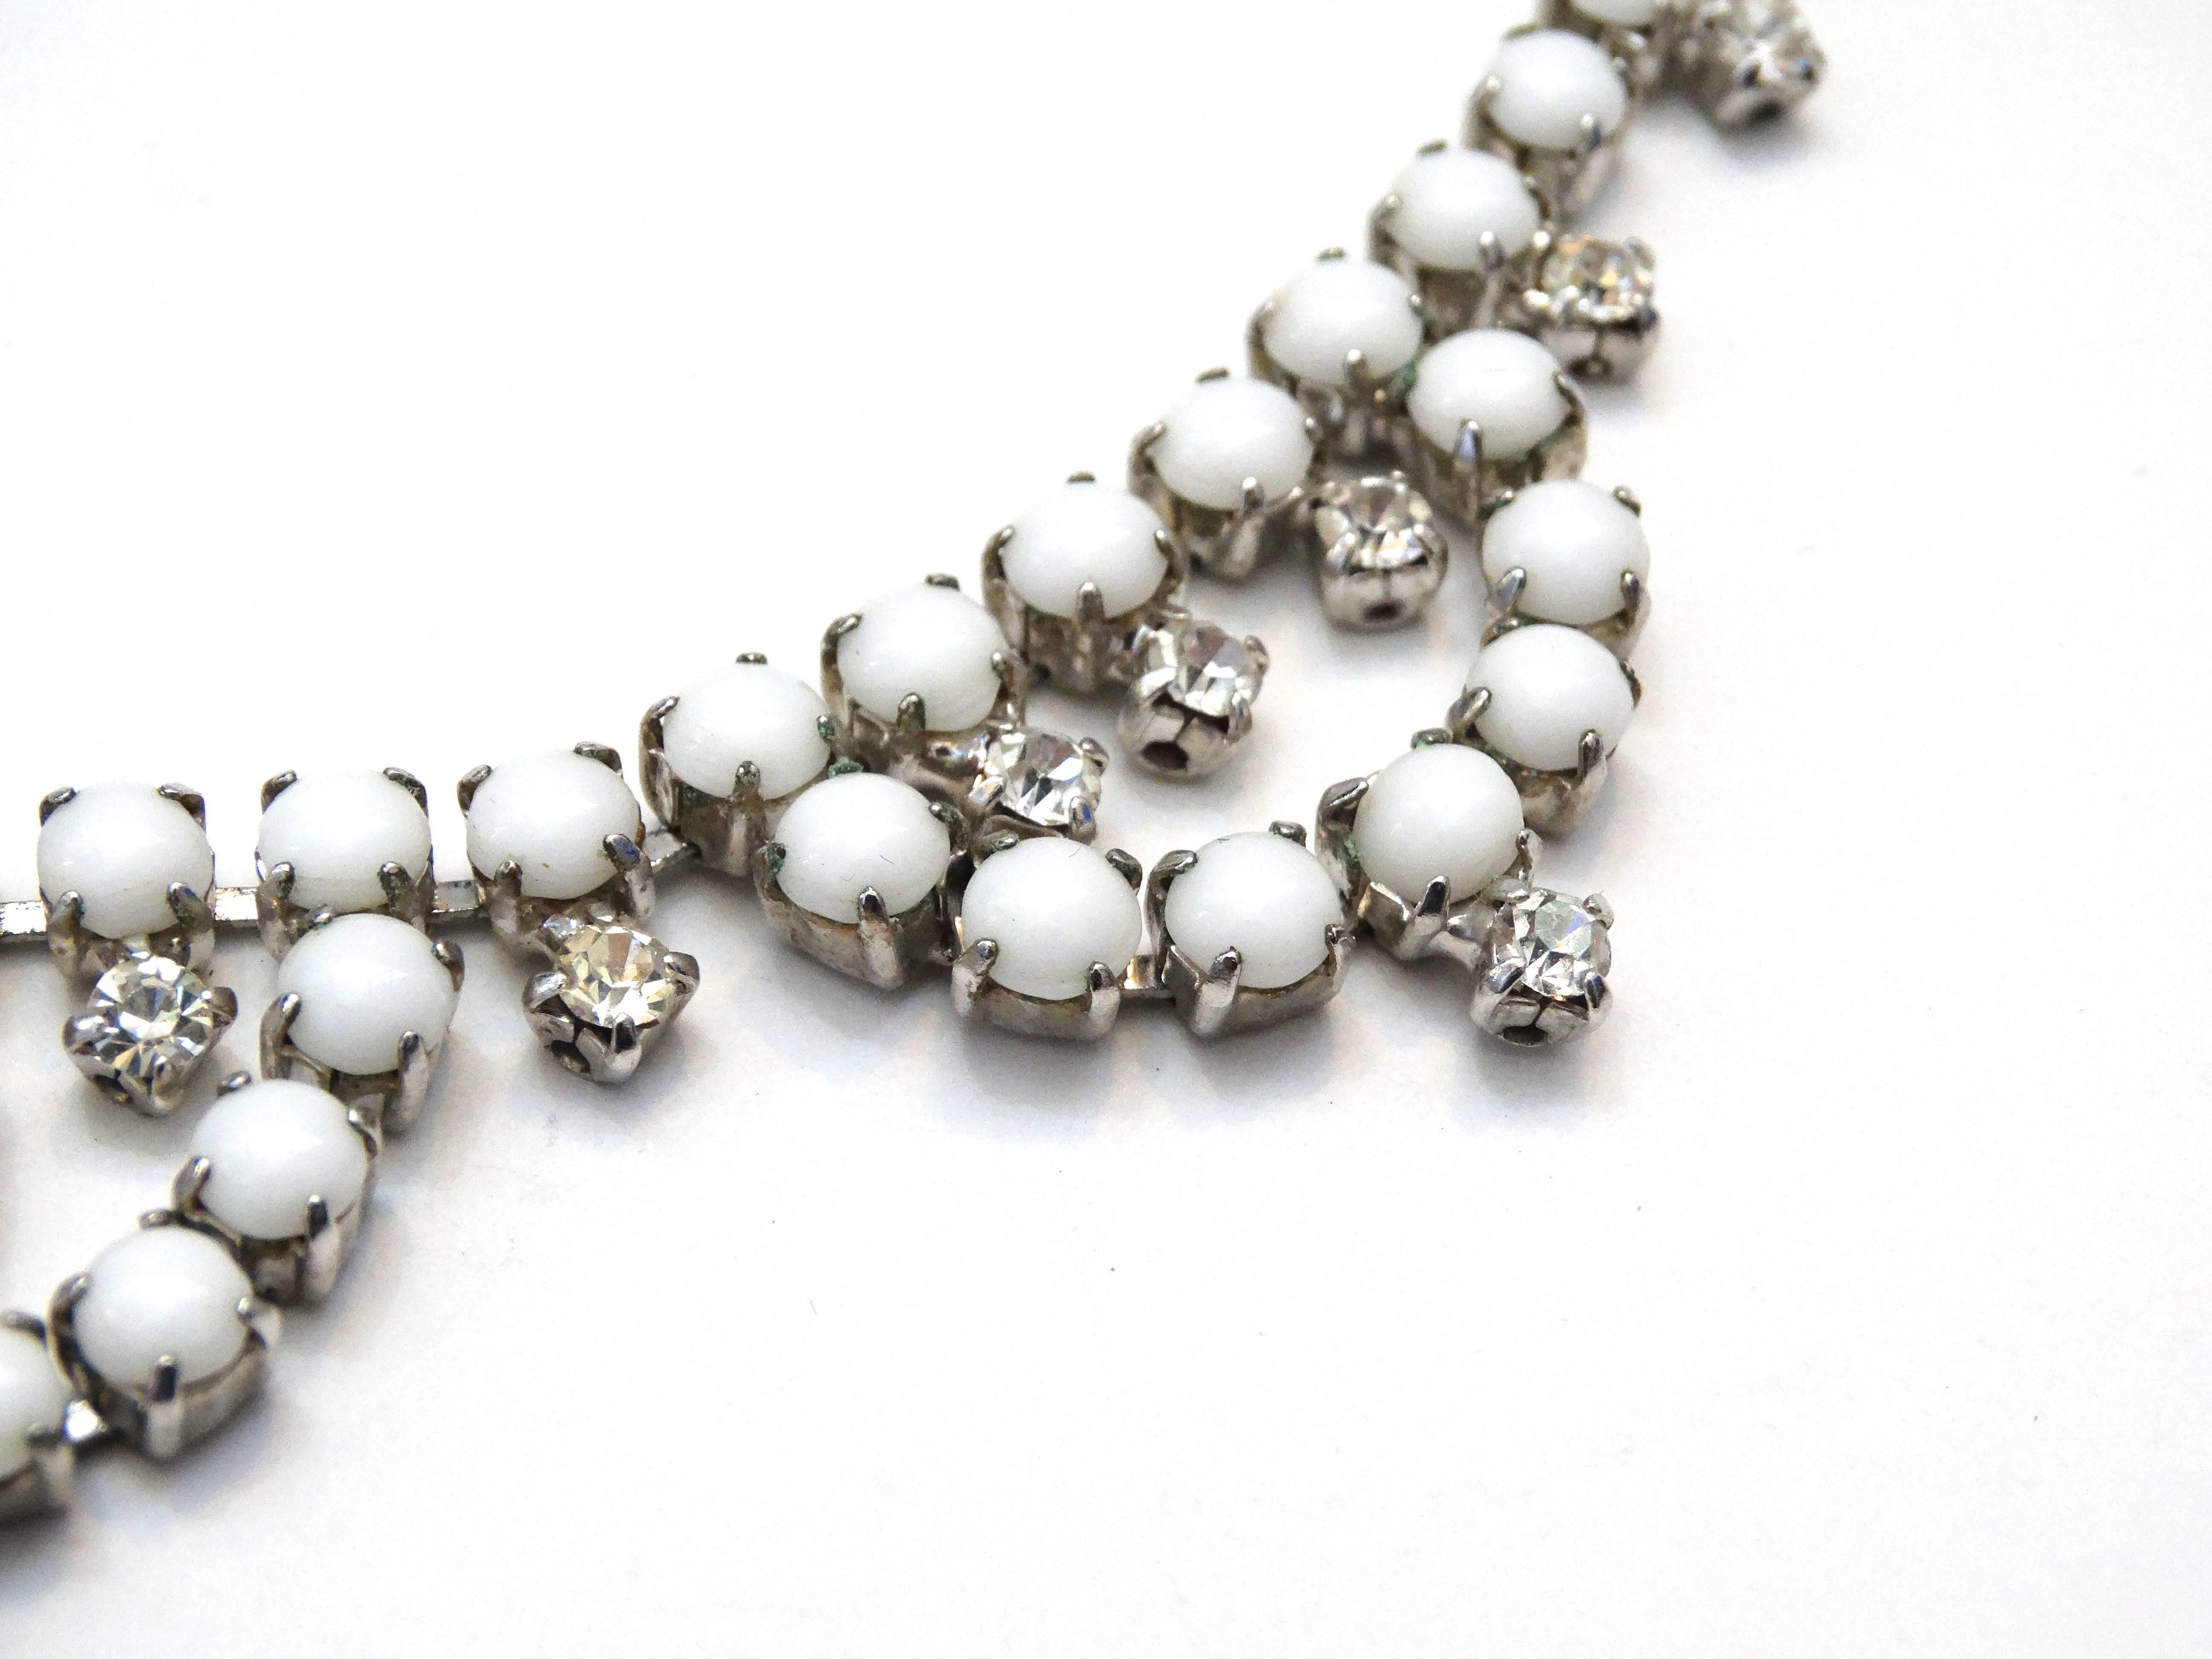 Channel the style and class of the 1960s with our amazing white rhinestone choker necklace! Milky white rhinestones contrasted with crystals throughout the piece, all set in silver toned metal. This piece has a hook closure for an adjustable fit,